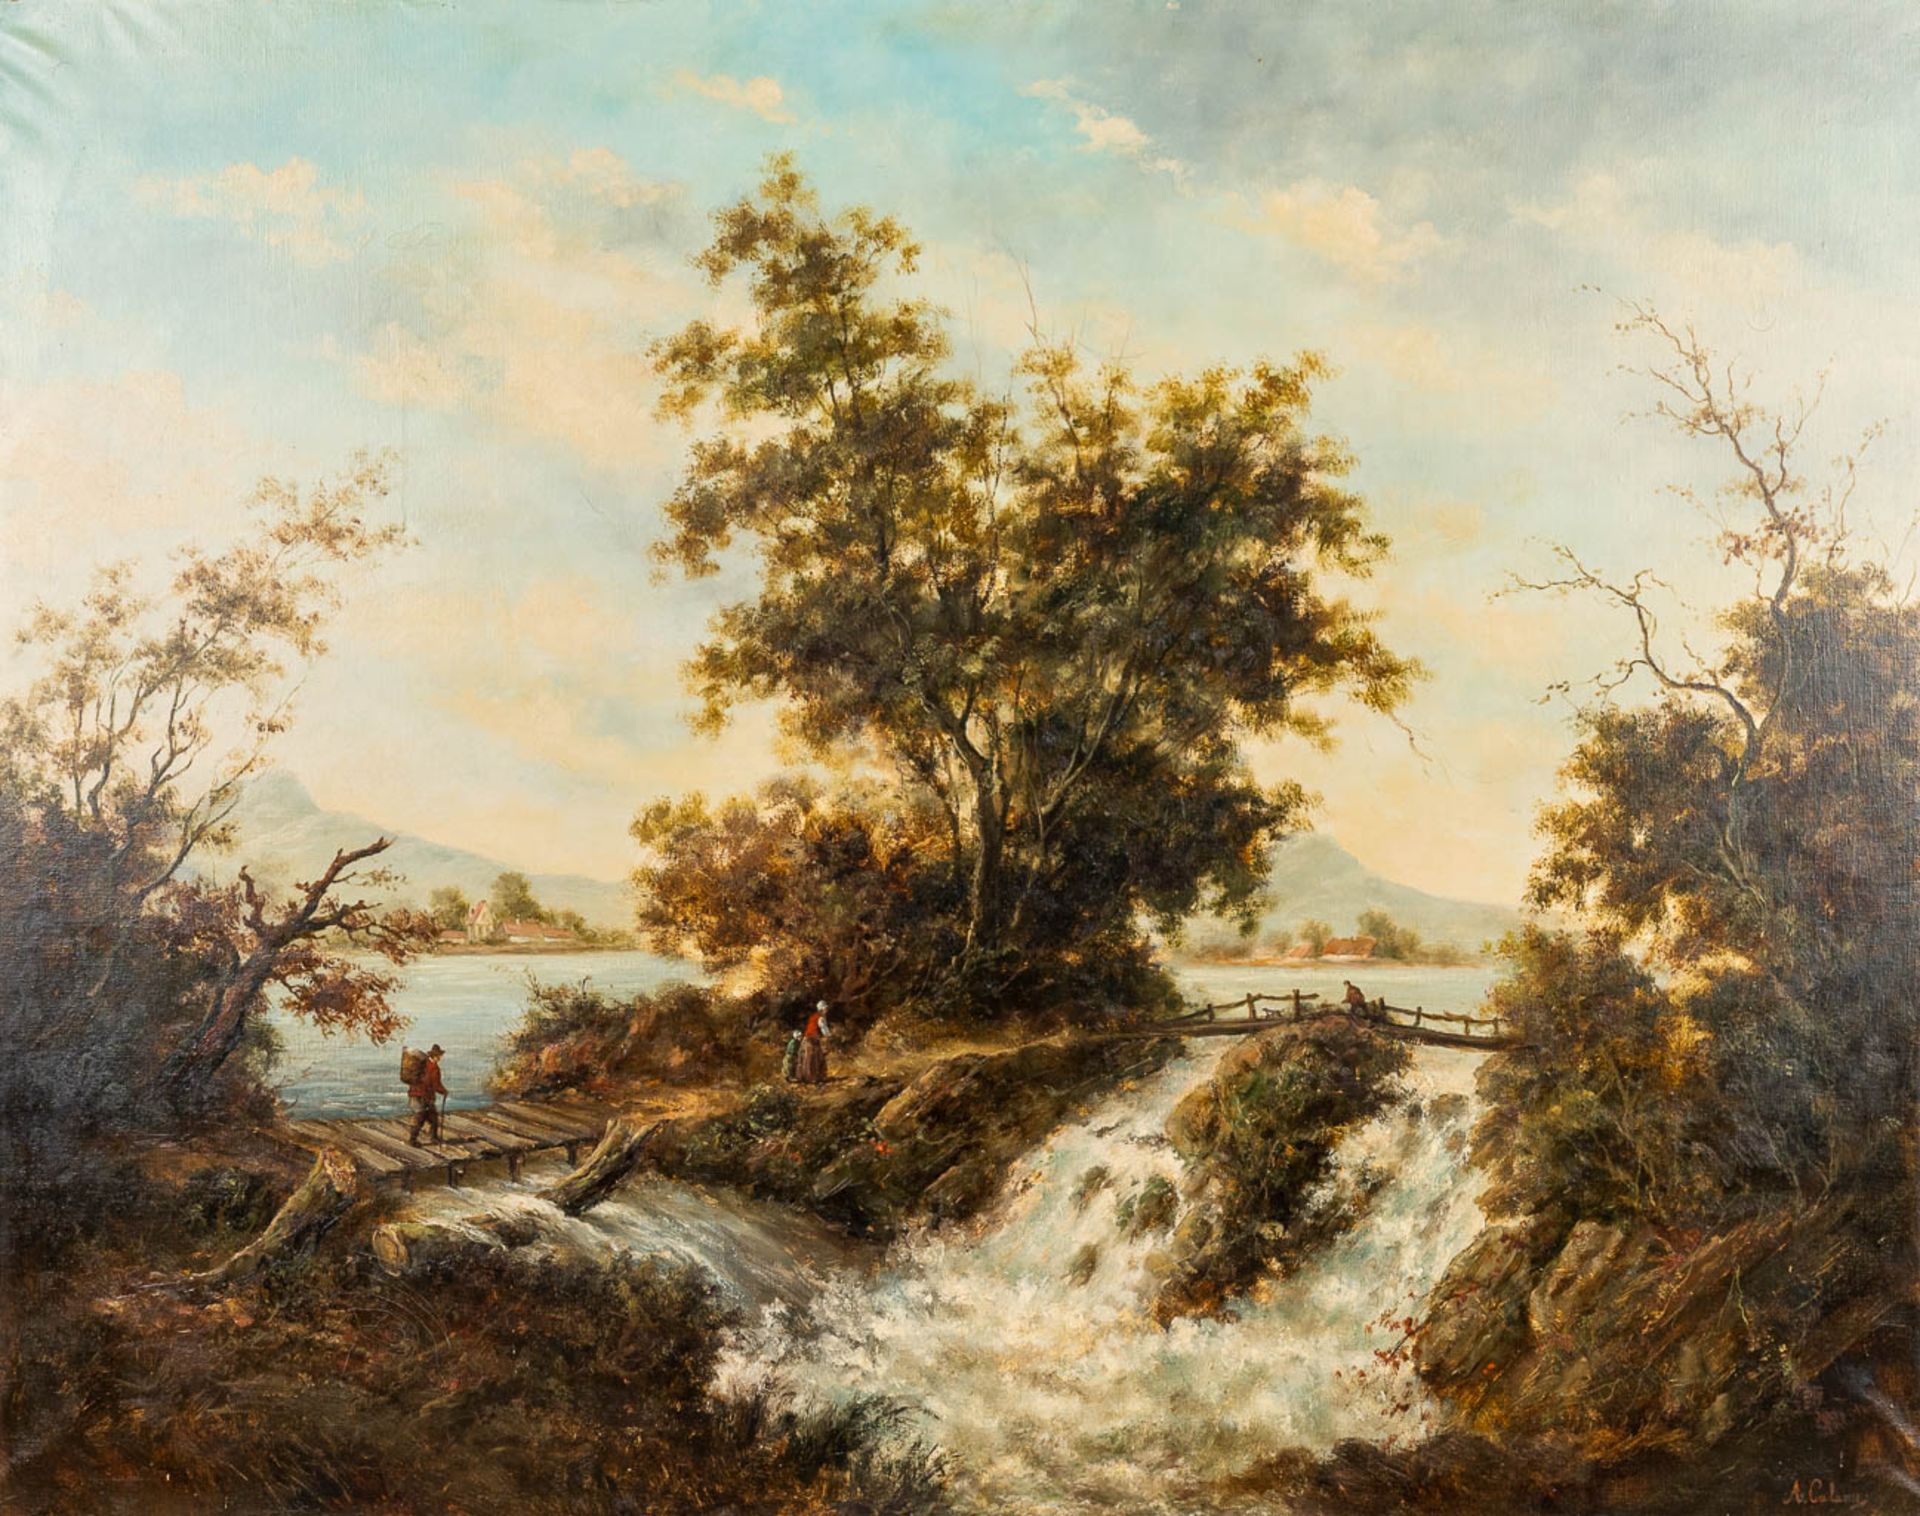 Arthur CALAME (1843-1919) 'The Waterfall', a painting oil on canvas. (W:130 x H:102 cm)